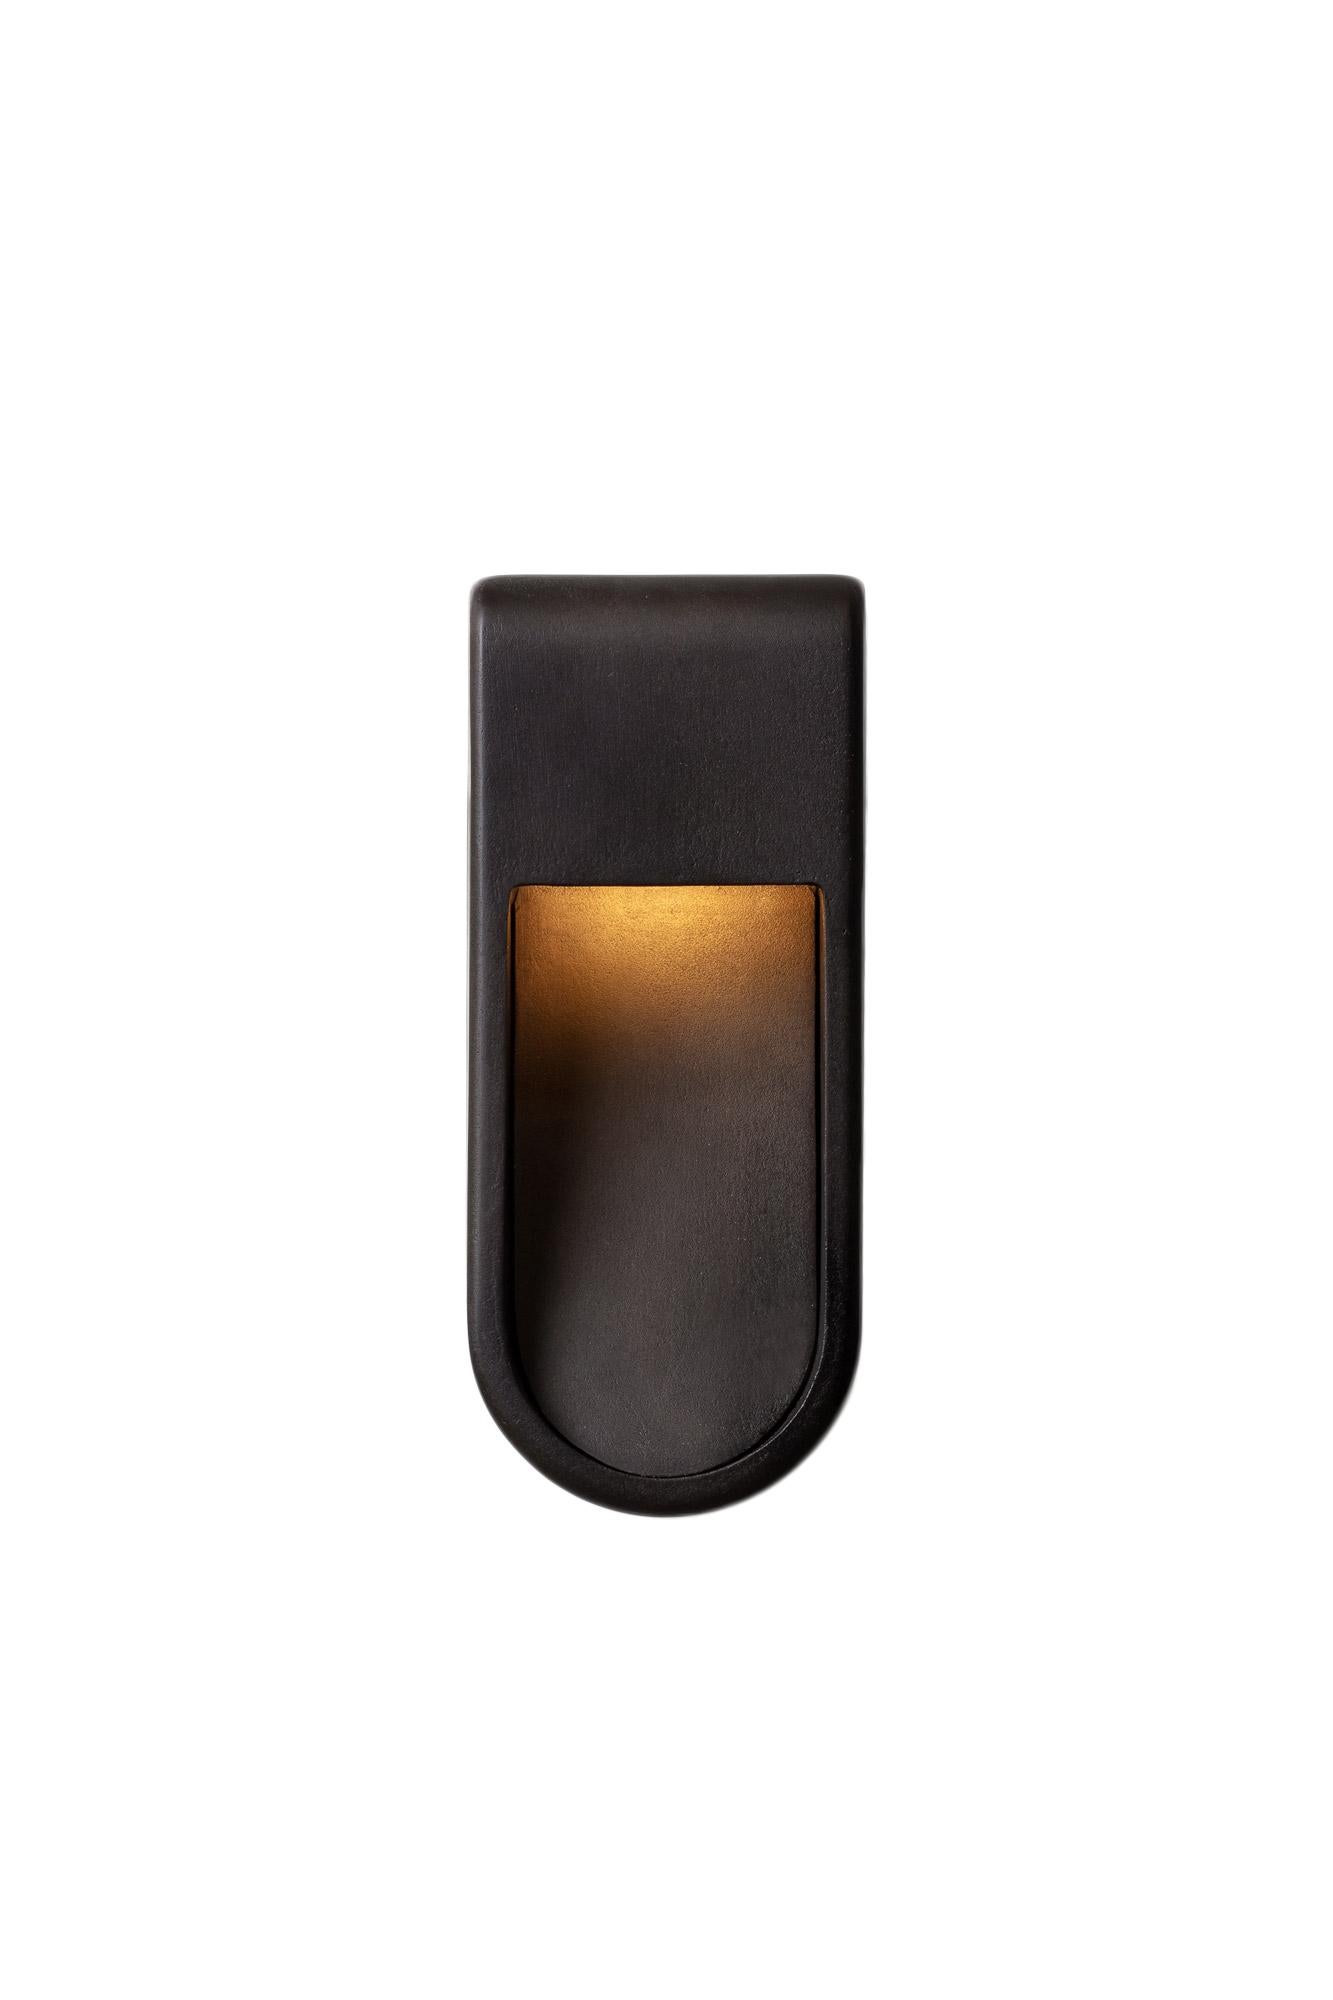 Kyoto Indoor Outdoor Led Cast Sconce Plated Size Wide Wet Rated Light (Messing) im Angebot